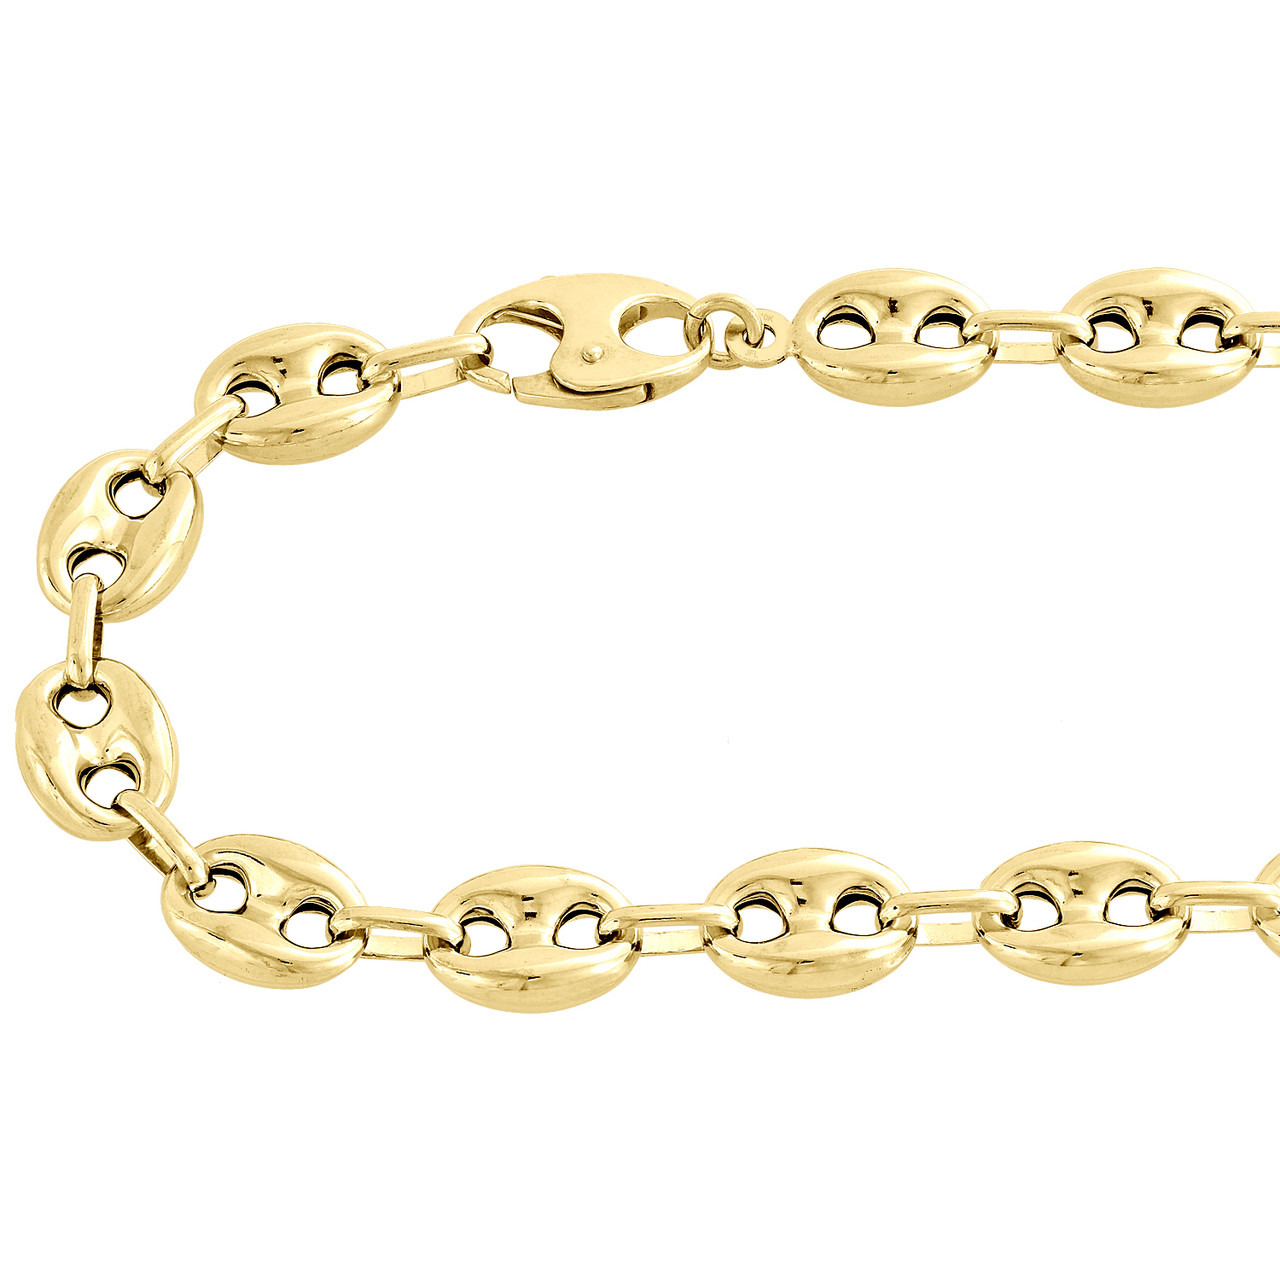 YELLOW GOLD PUFFED GUCCI-STYLE CHAIN NECKLACE, 10MM - Howard's Jewelry  Center